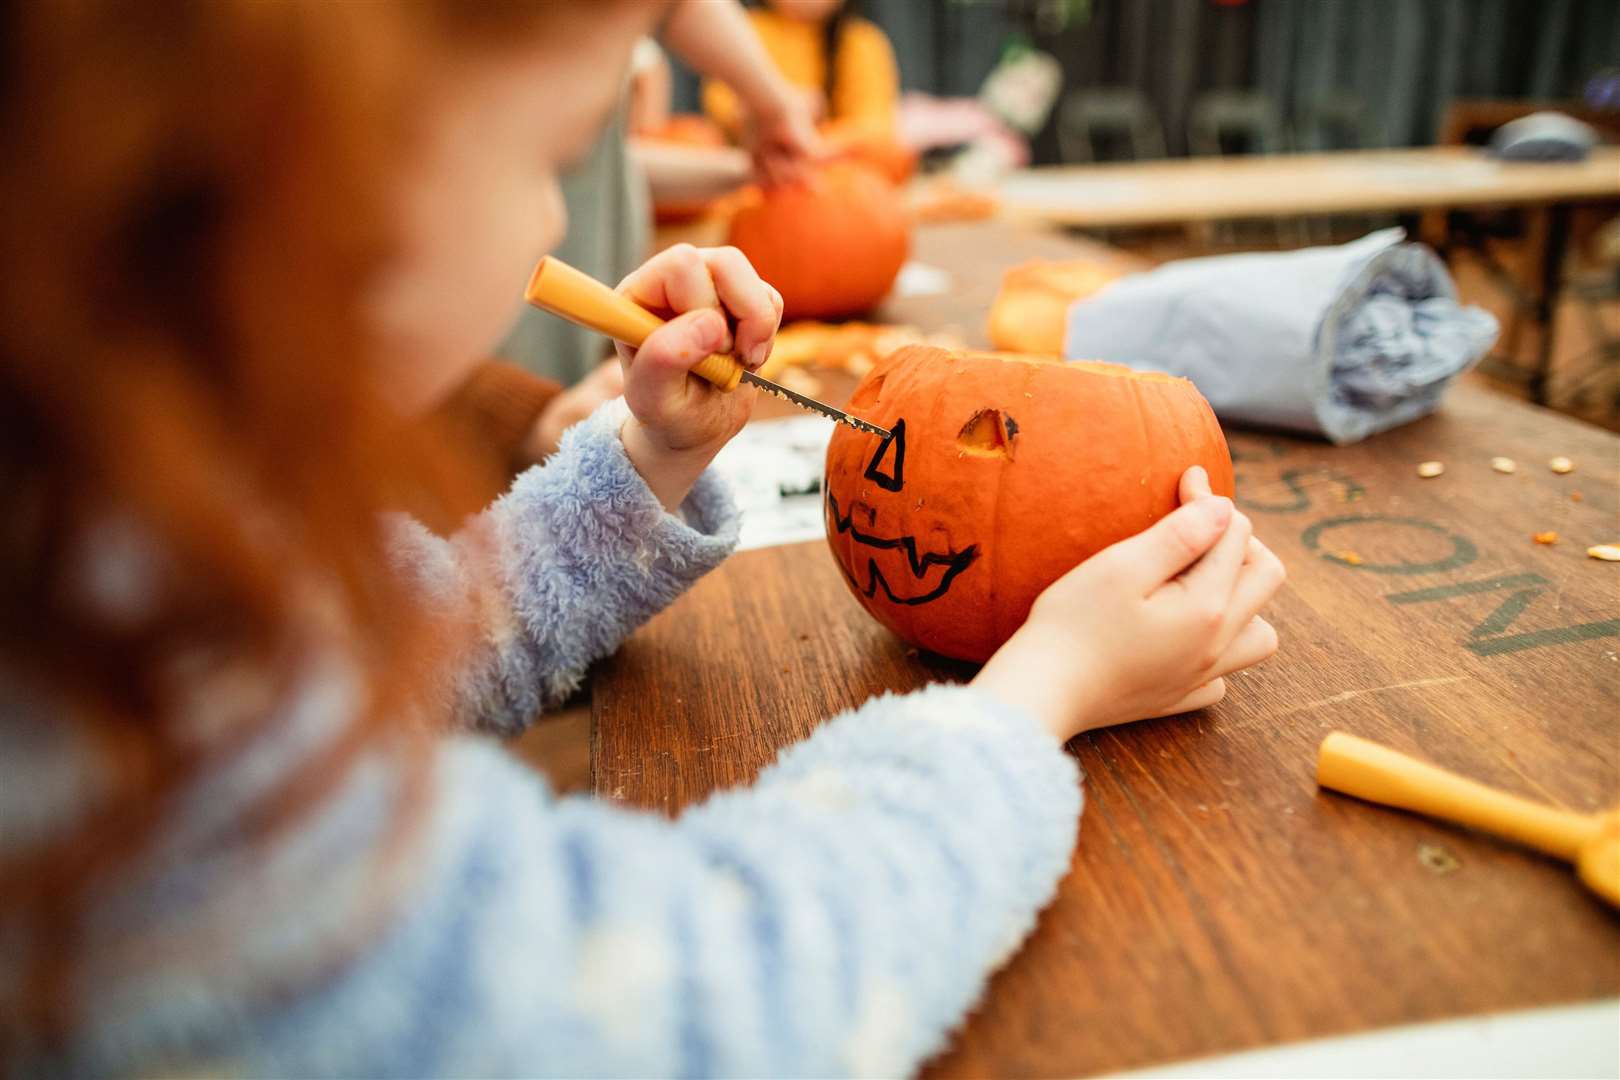 Leaving Halloween decorations outside will indicate your house wants to join events. Image: iStock.